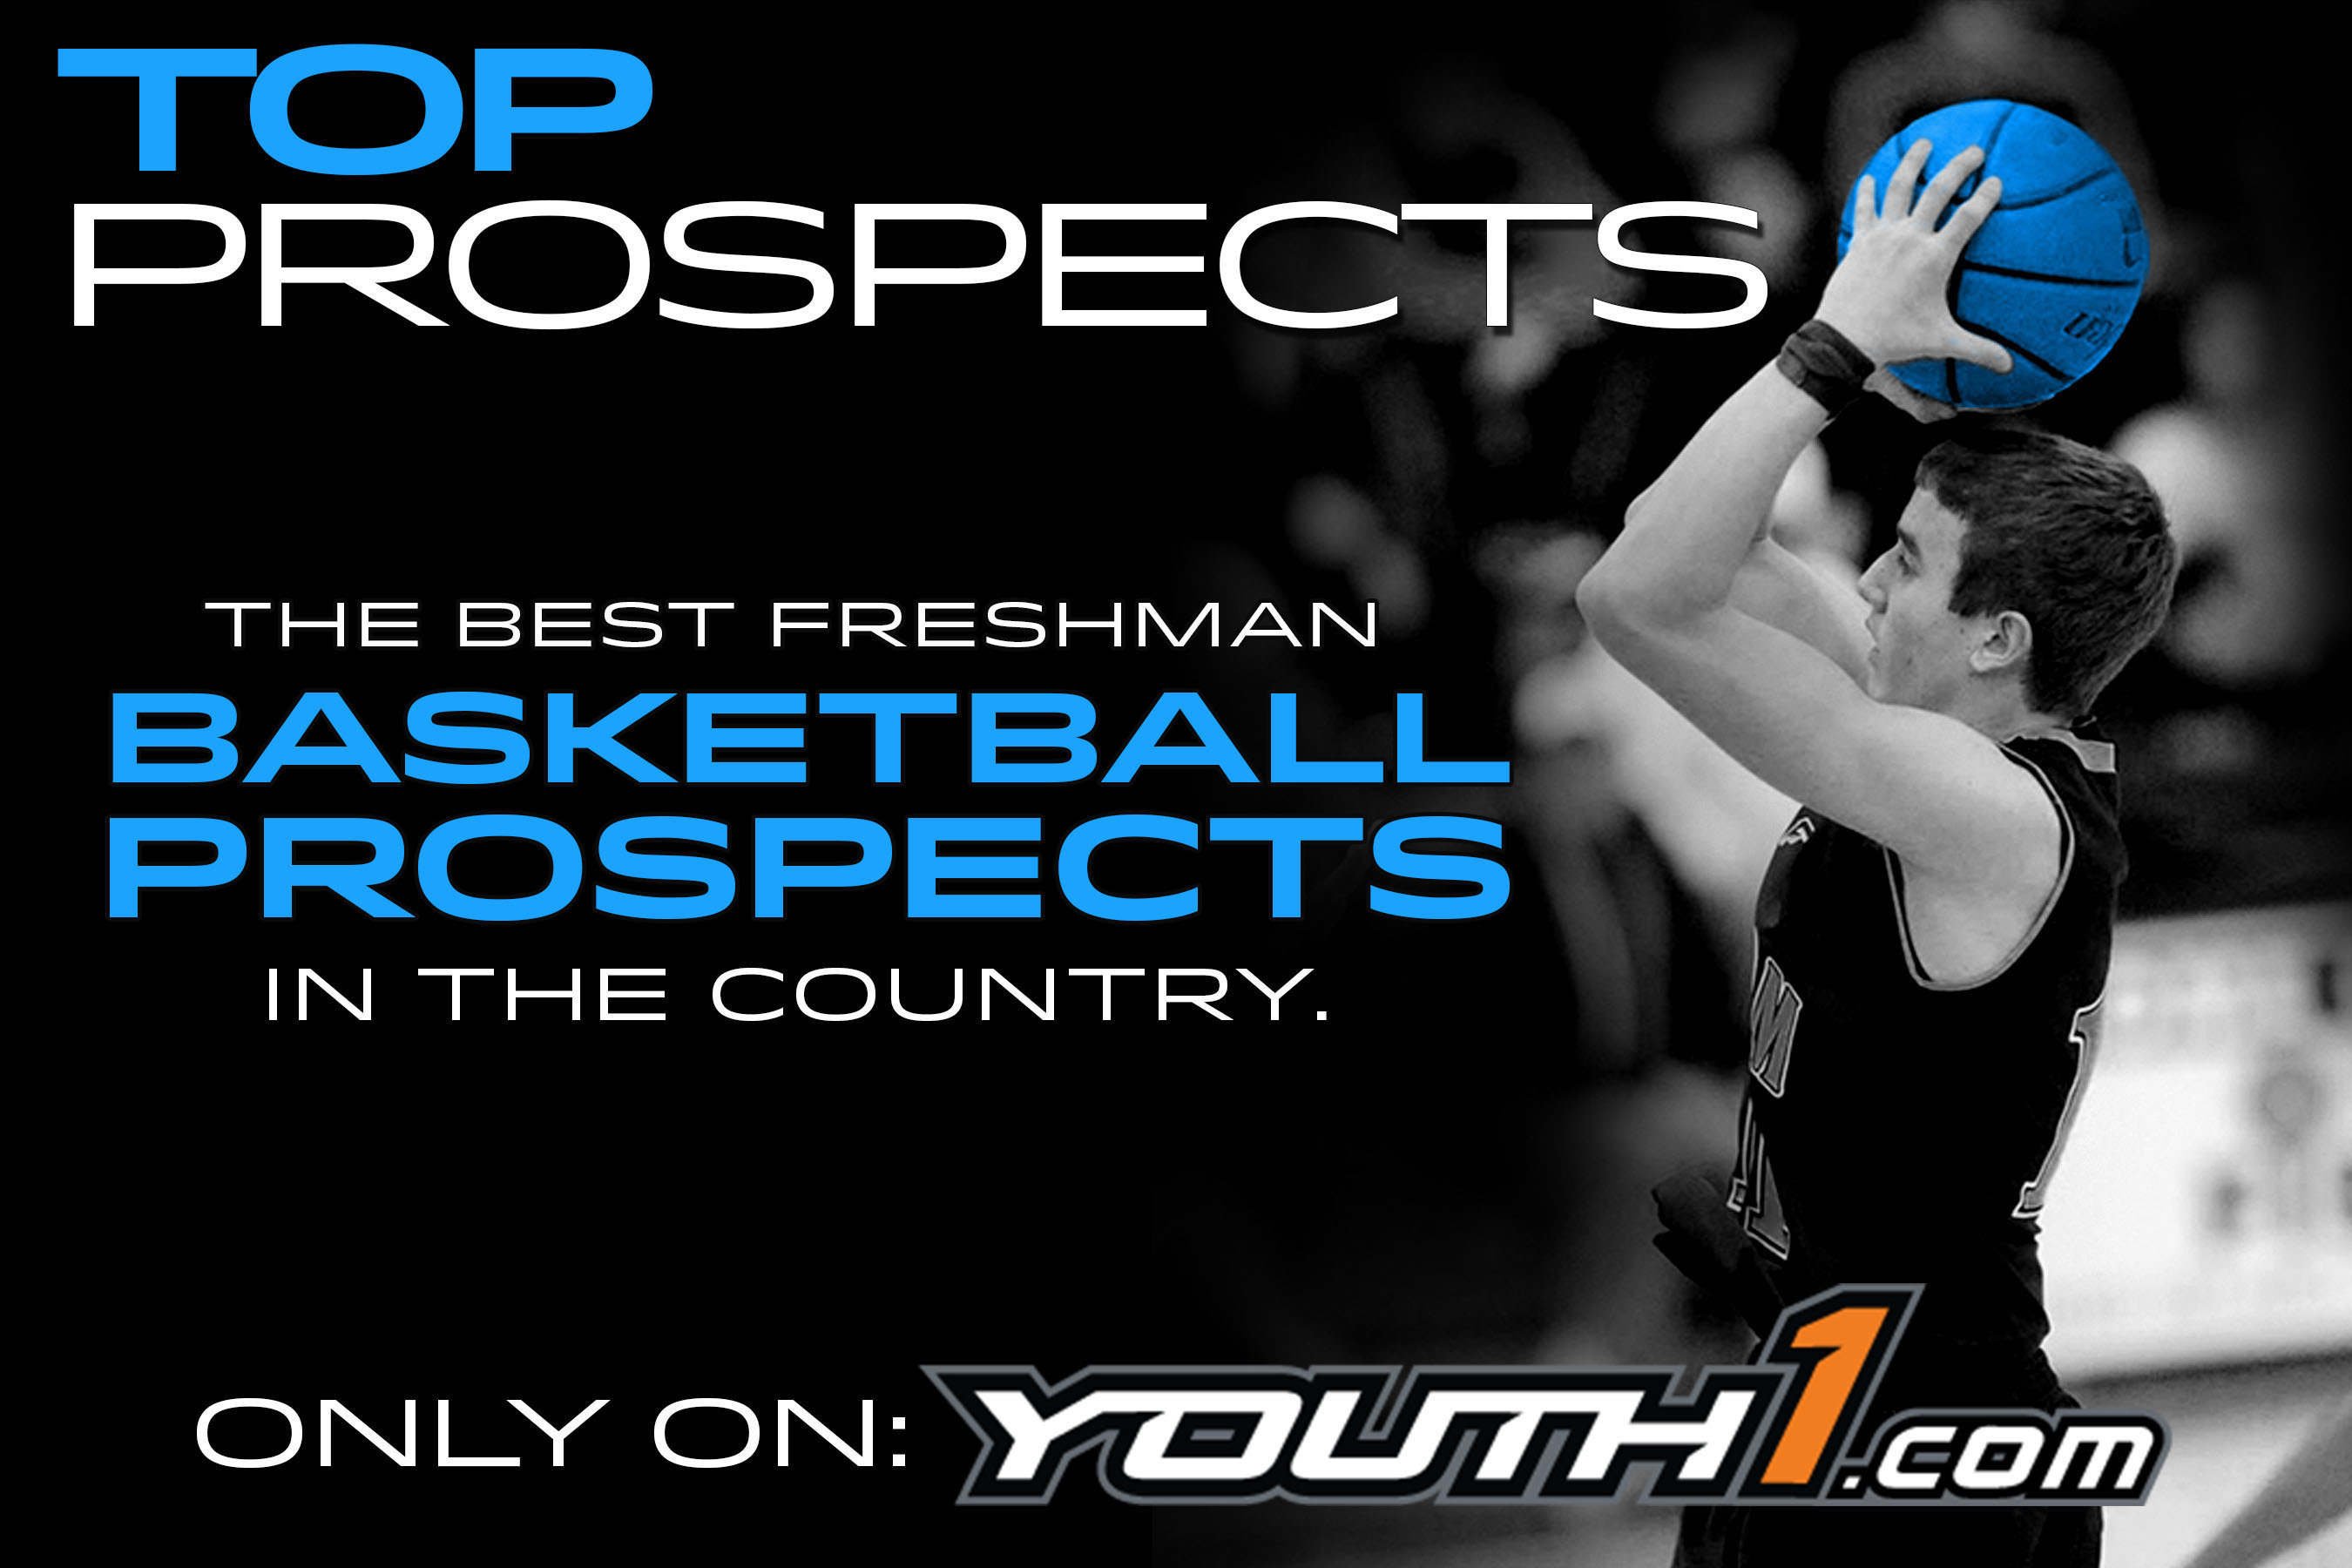 Youth1.com launches the first installment of its Class of 2017 Basketball Top Prospects list which features over 100 of the best players by position. This in-depth report features players who have been placed on the radar of top D1 programs, some of whom have received scholarship offers all before entering high school. This report will be followed by three additional installments released each Tuesday, concluding October 1. (PRNewsFoto/Youth1 Media) (PRNewsFoto/YOUTH1 MEDIA)